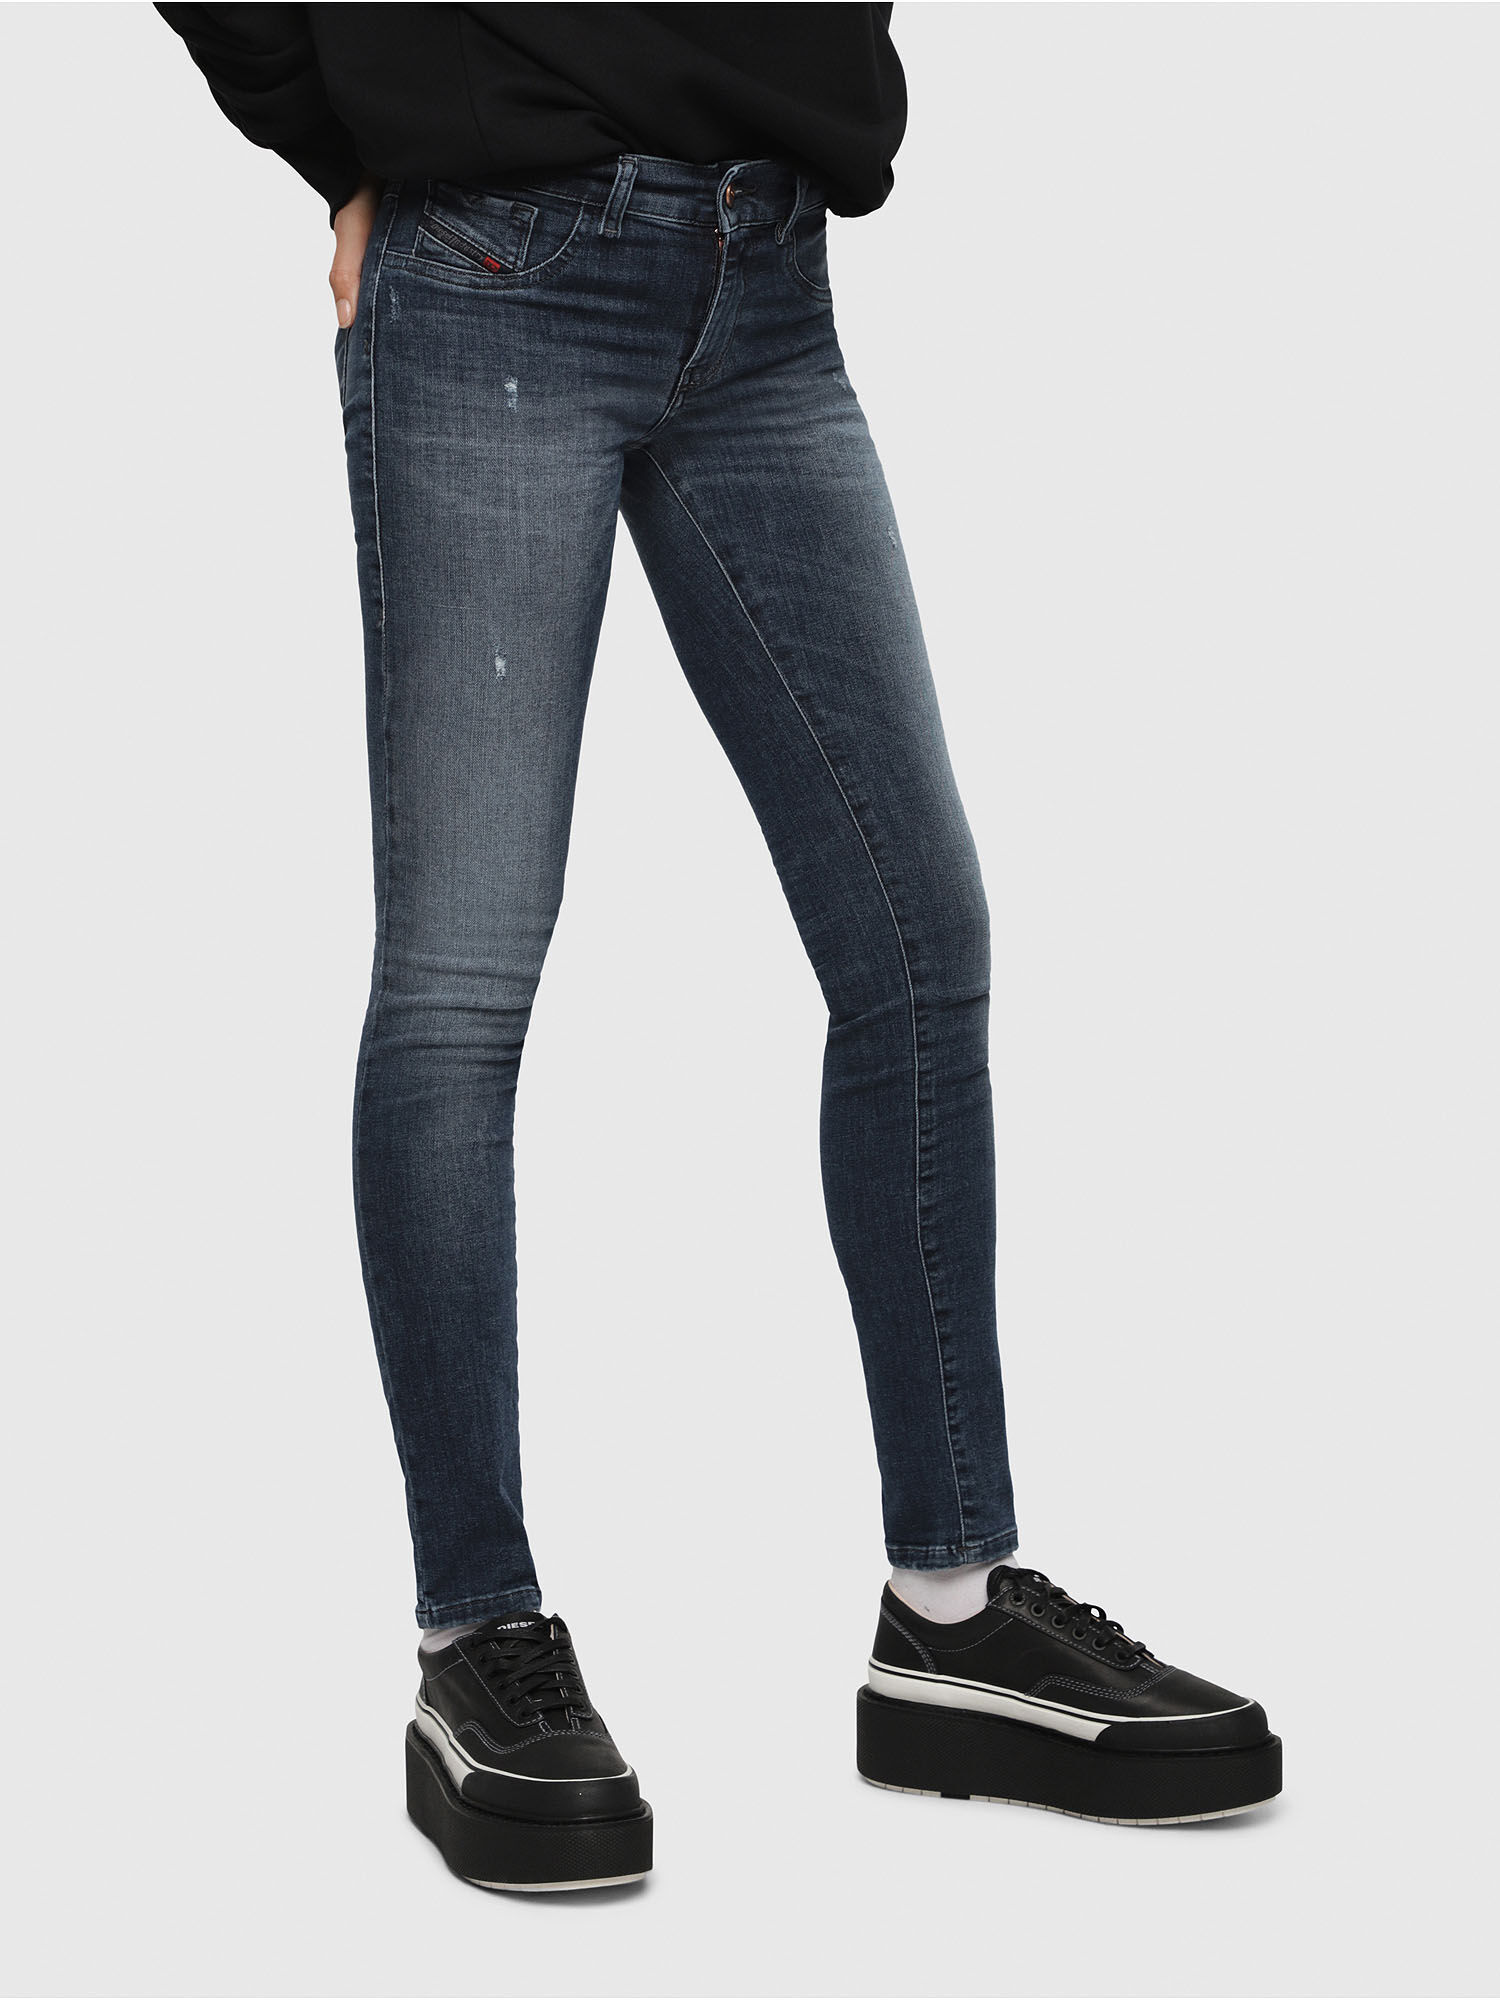 loose ripped jeans womens